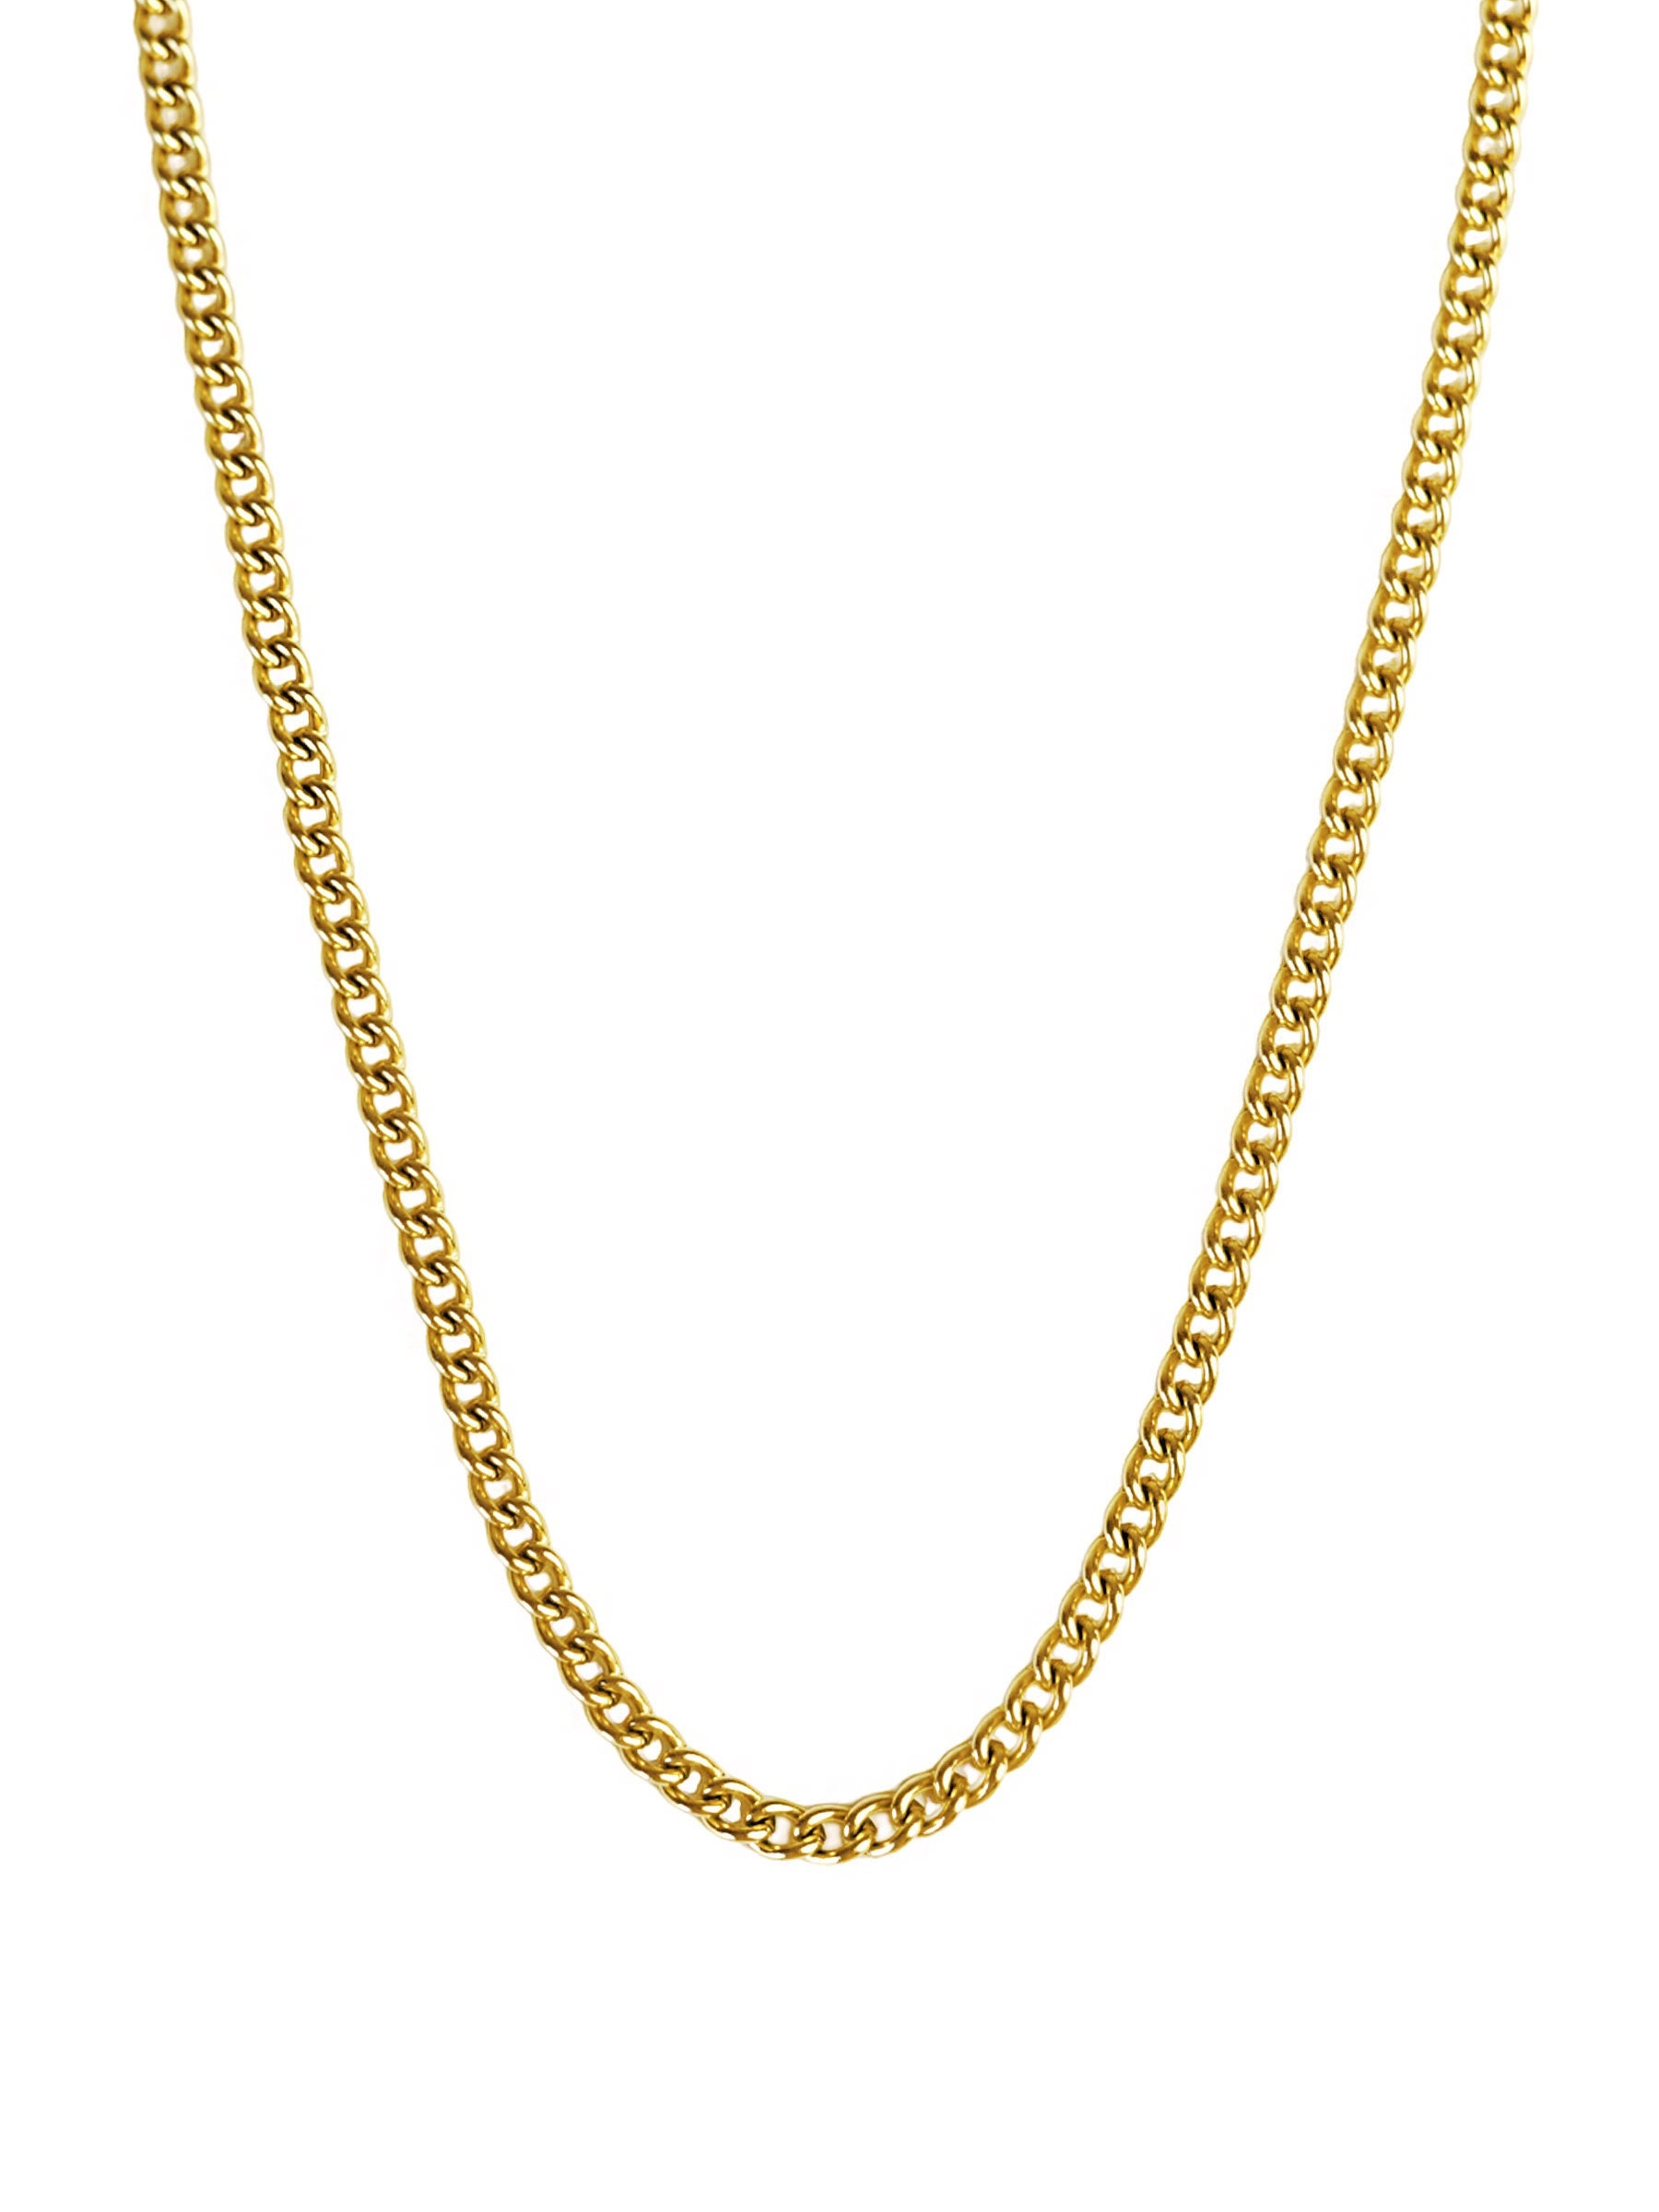 US$ 58.00 - 4 Feet Supper Large Chunky Resin Gold Chain Links, Plastic Chain  Links, Necklace Chain Links, Open Link ,Size 15mmx25mm - m.